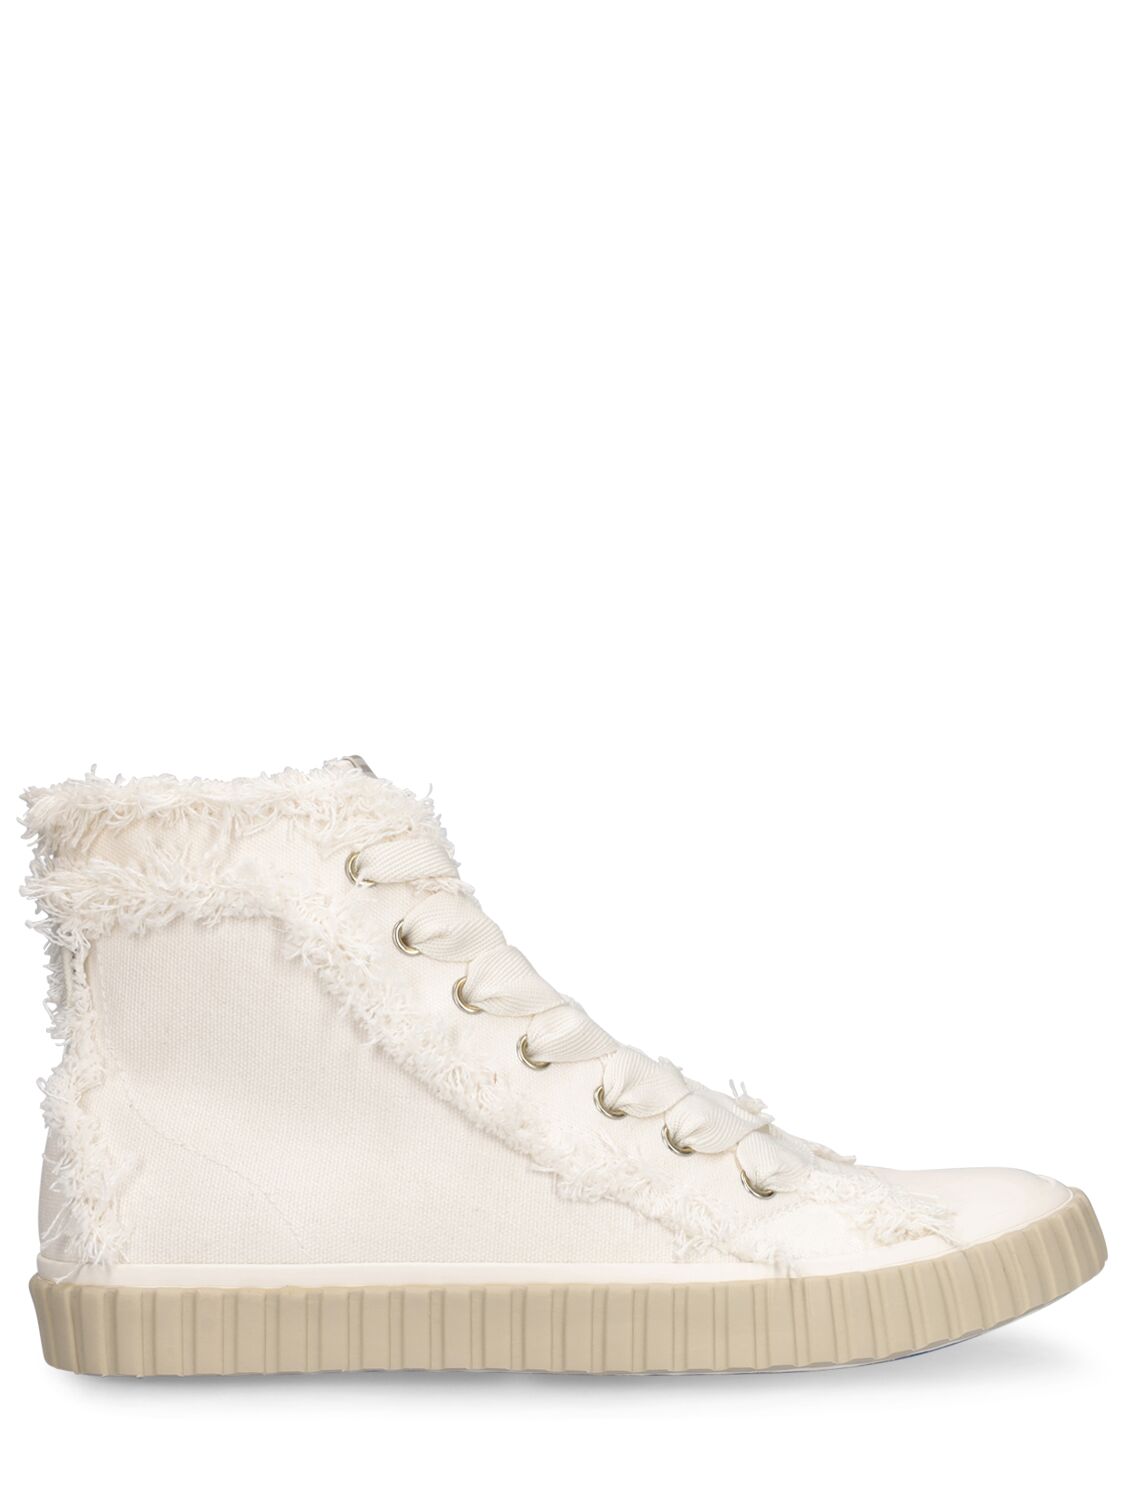 Zimmermann Cotton High Top Sneakers In Off White